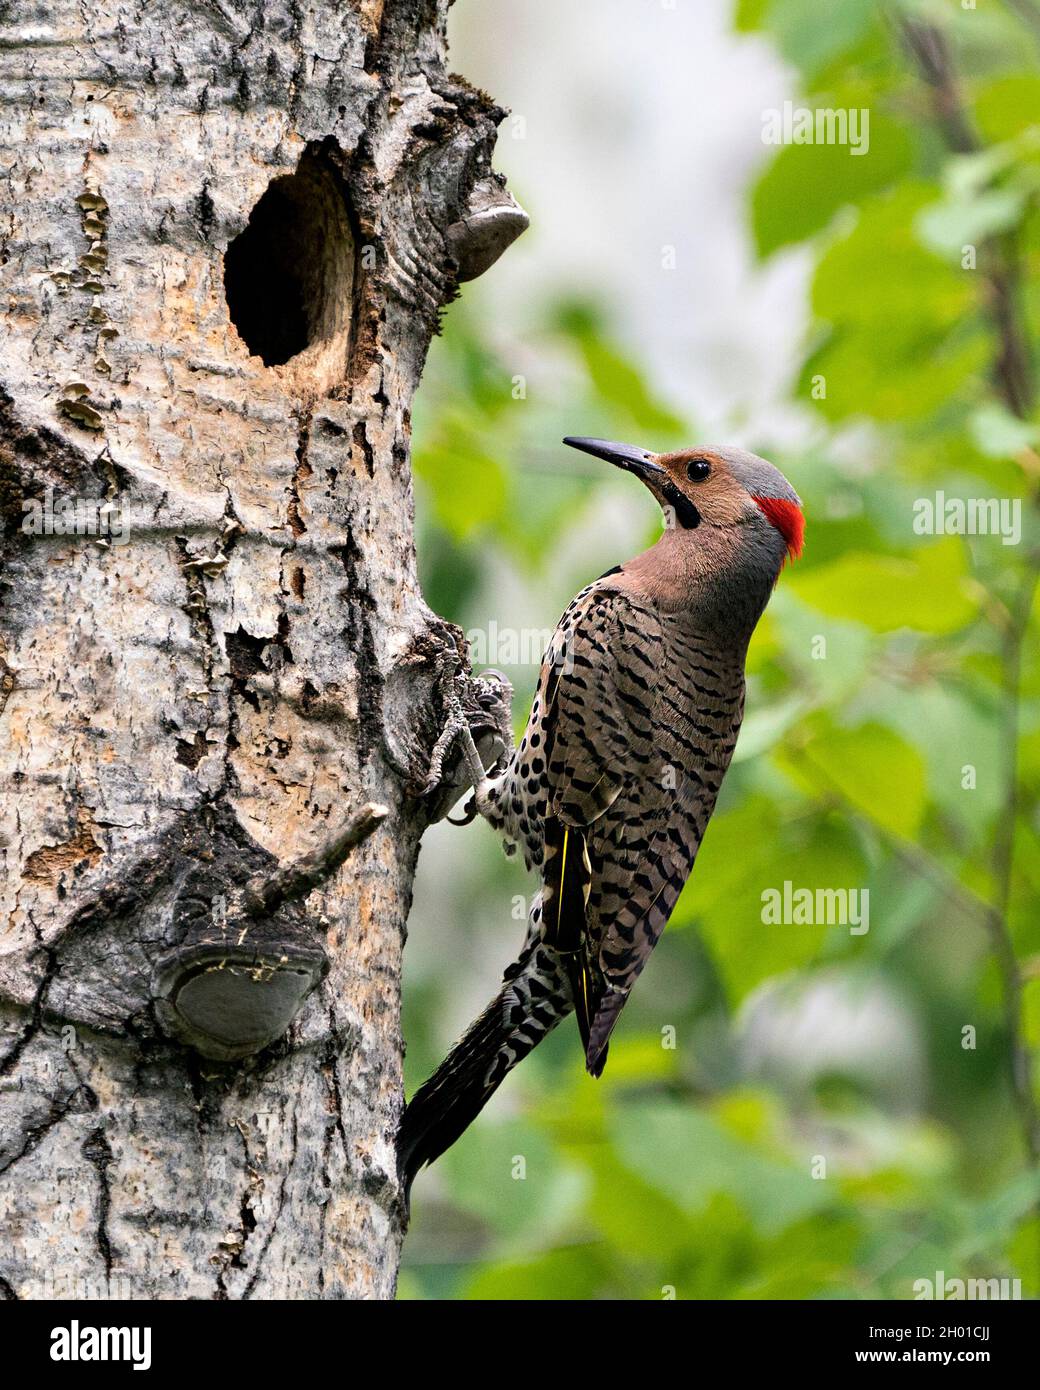 Northern Flicker bird close-up view creeping on tree by its nest cavity entrance, in its environment and habitat surrounding during bird season mating Stock Photo